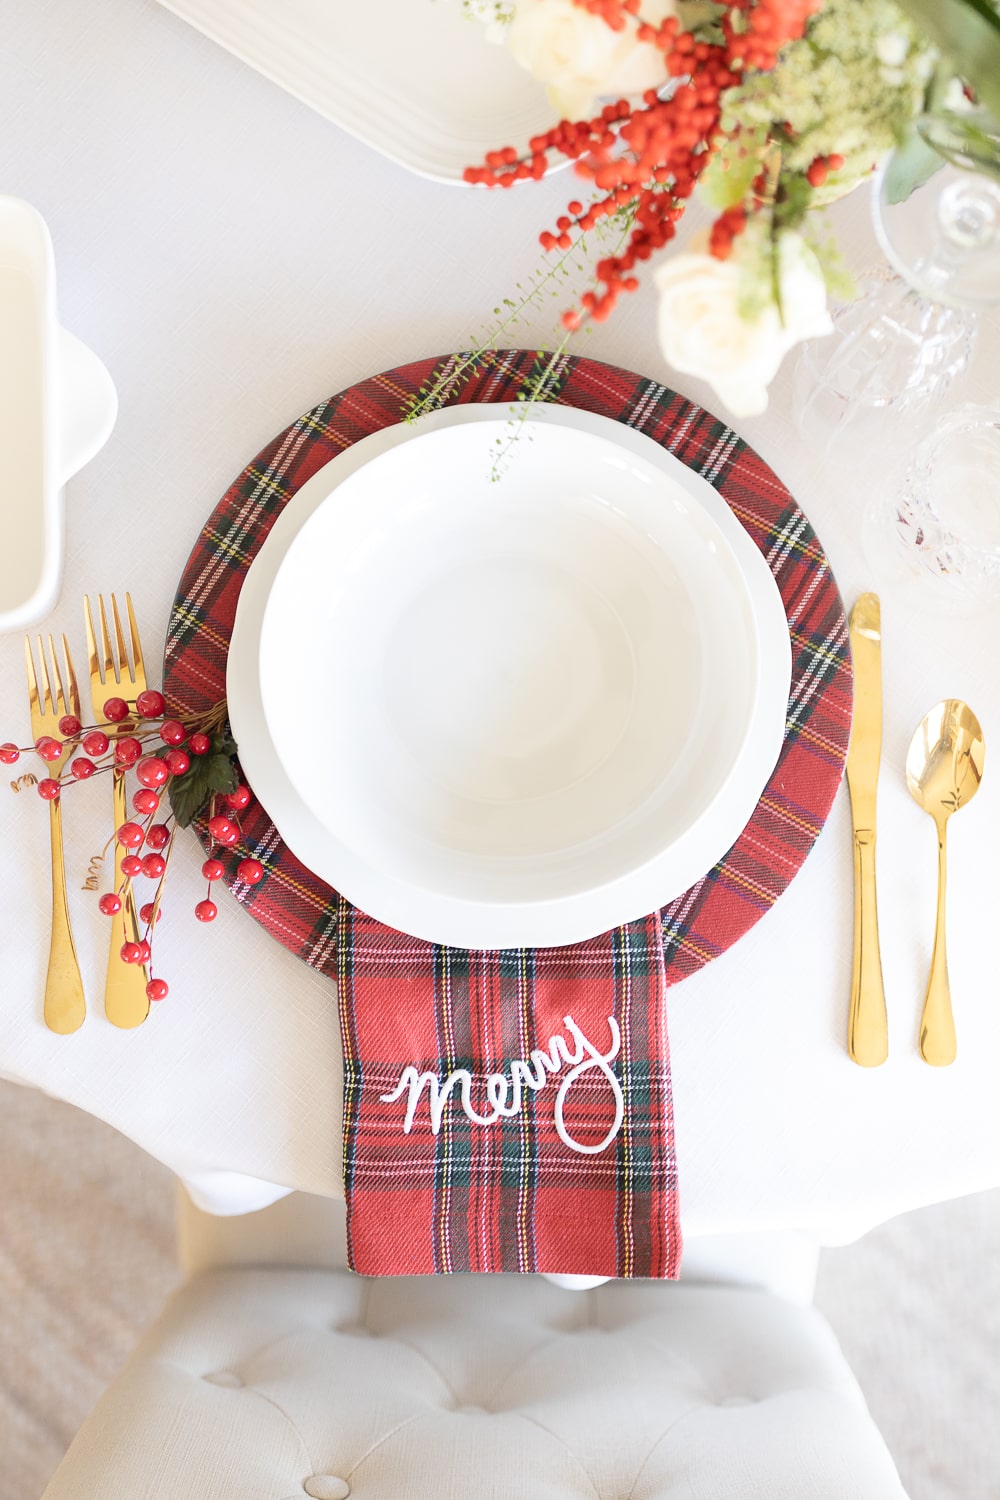 Christmas tablescape ideas from blogger Stephanie Ziajka on Diary of a Debutante